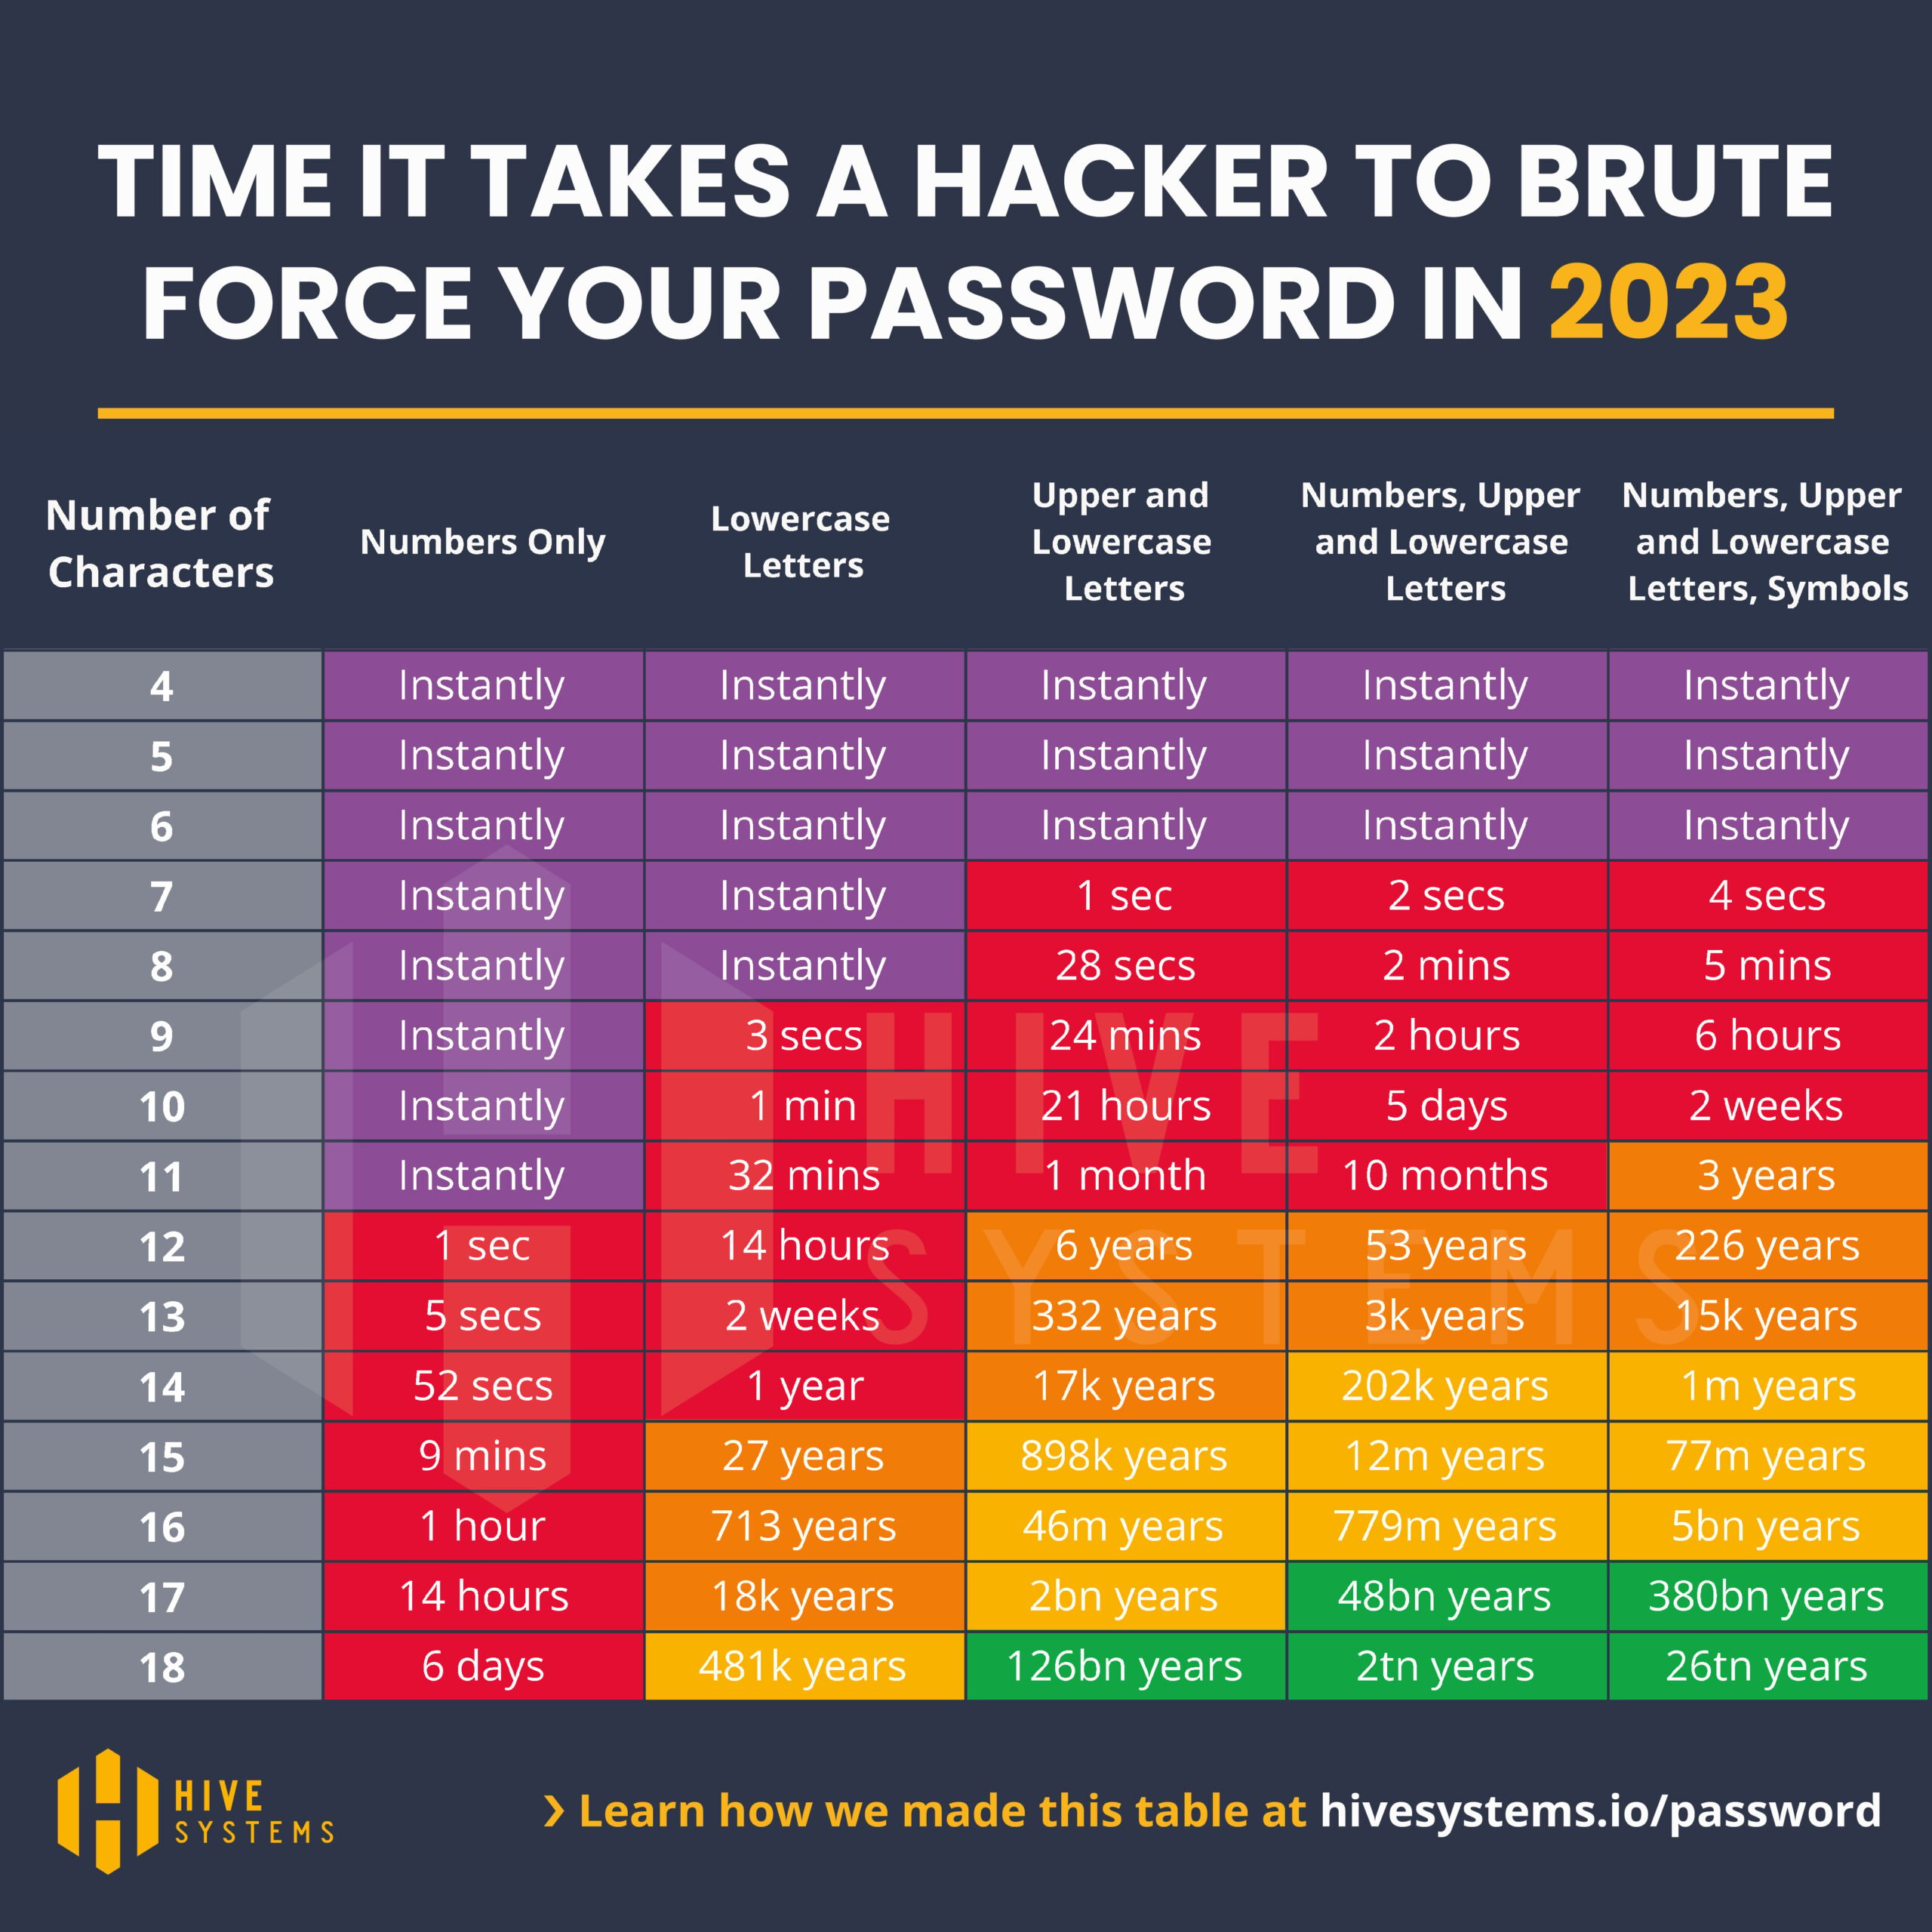 Can a hacker see your password?